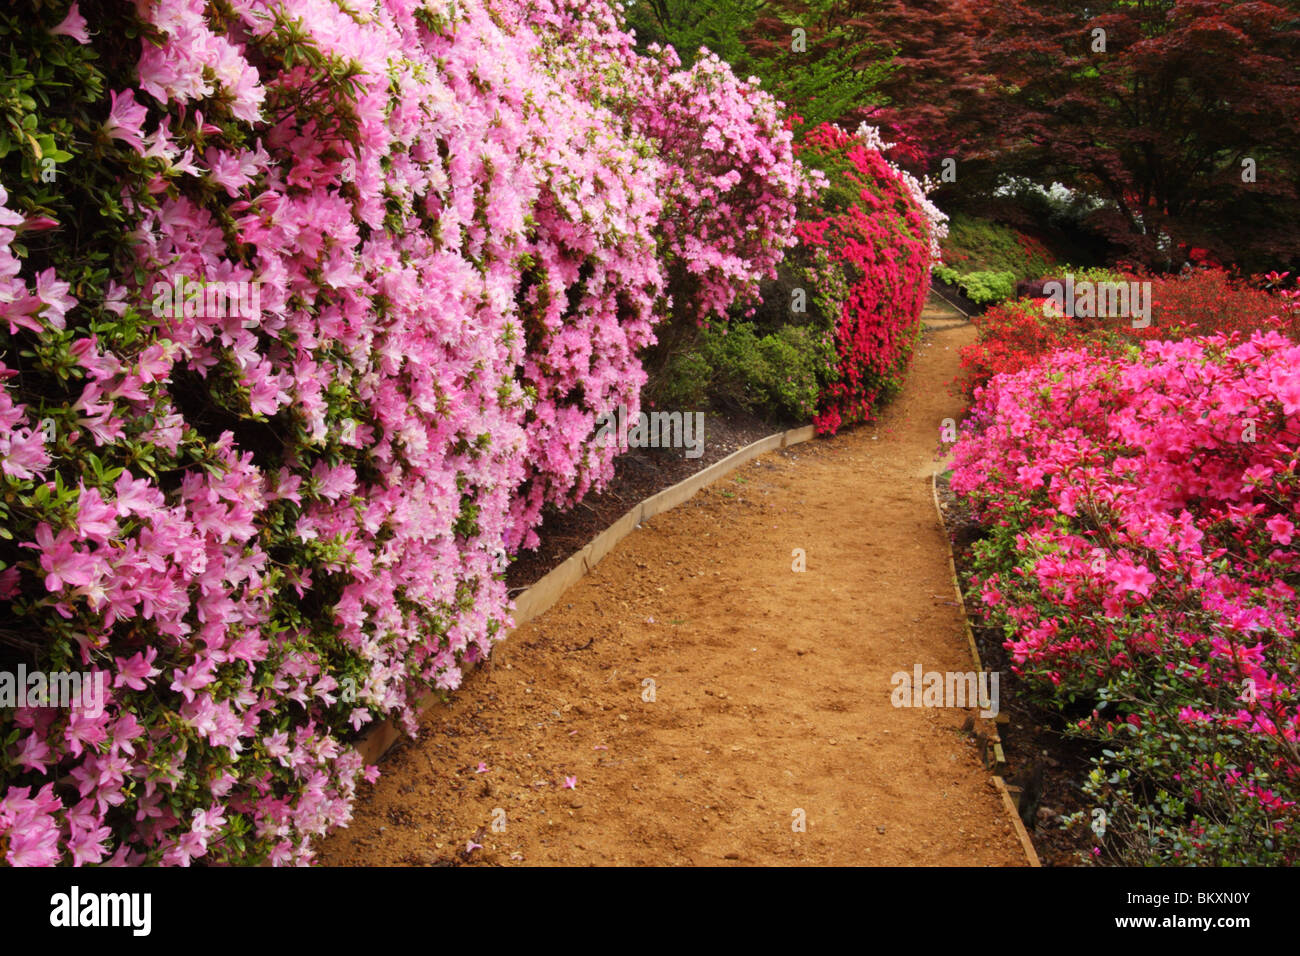 Azaleas and rhododendrons at the Punch Bowl, Valley Gardens, The Royal Landscape, Windsor Great Park, Surrey, United Kingdom Stock Photo